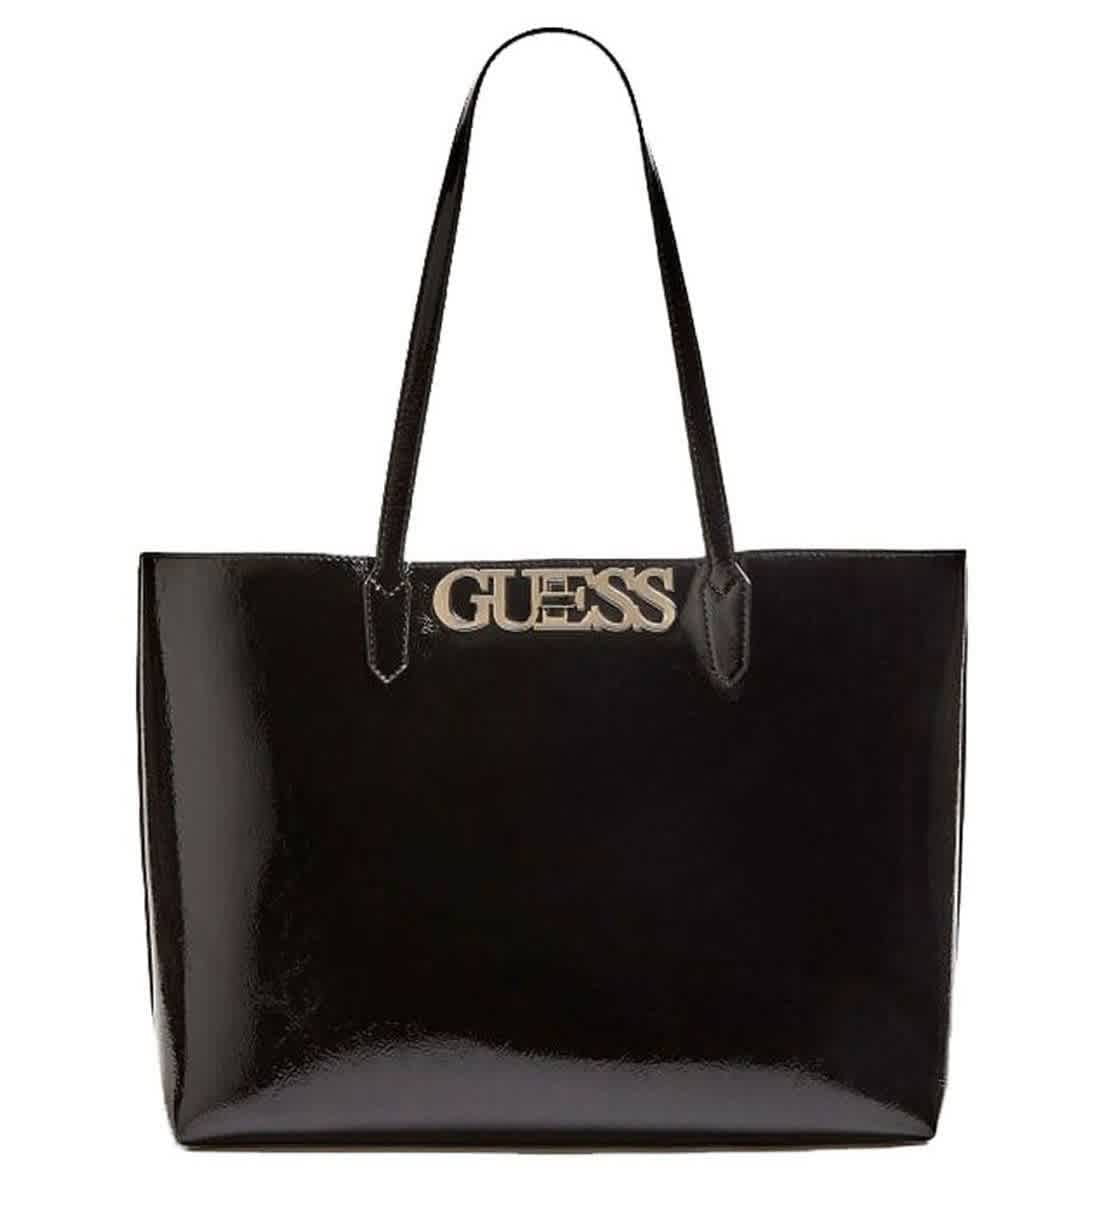 Guess Ladies Black Uptown Chic Barcelona Tote Bag